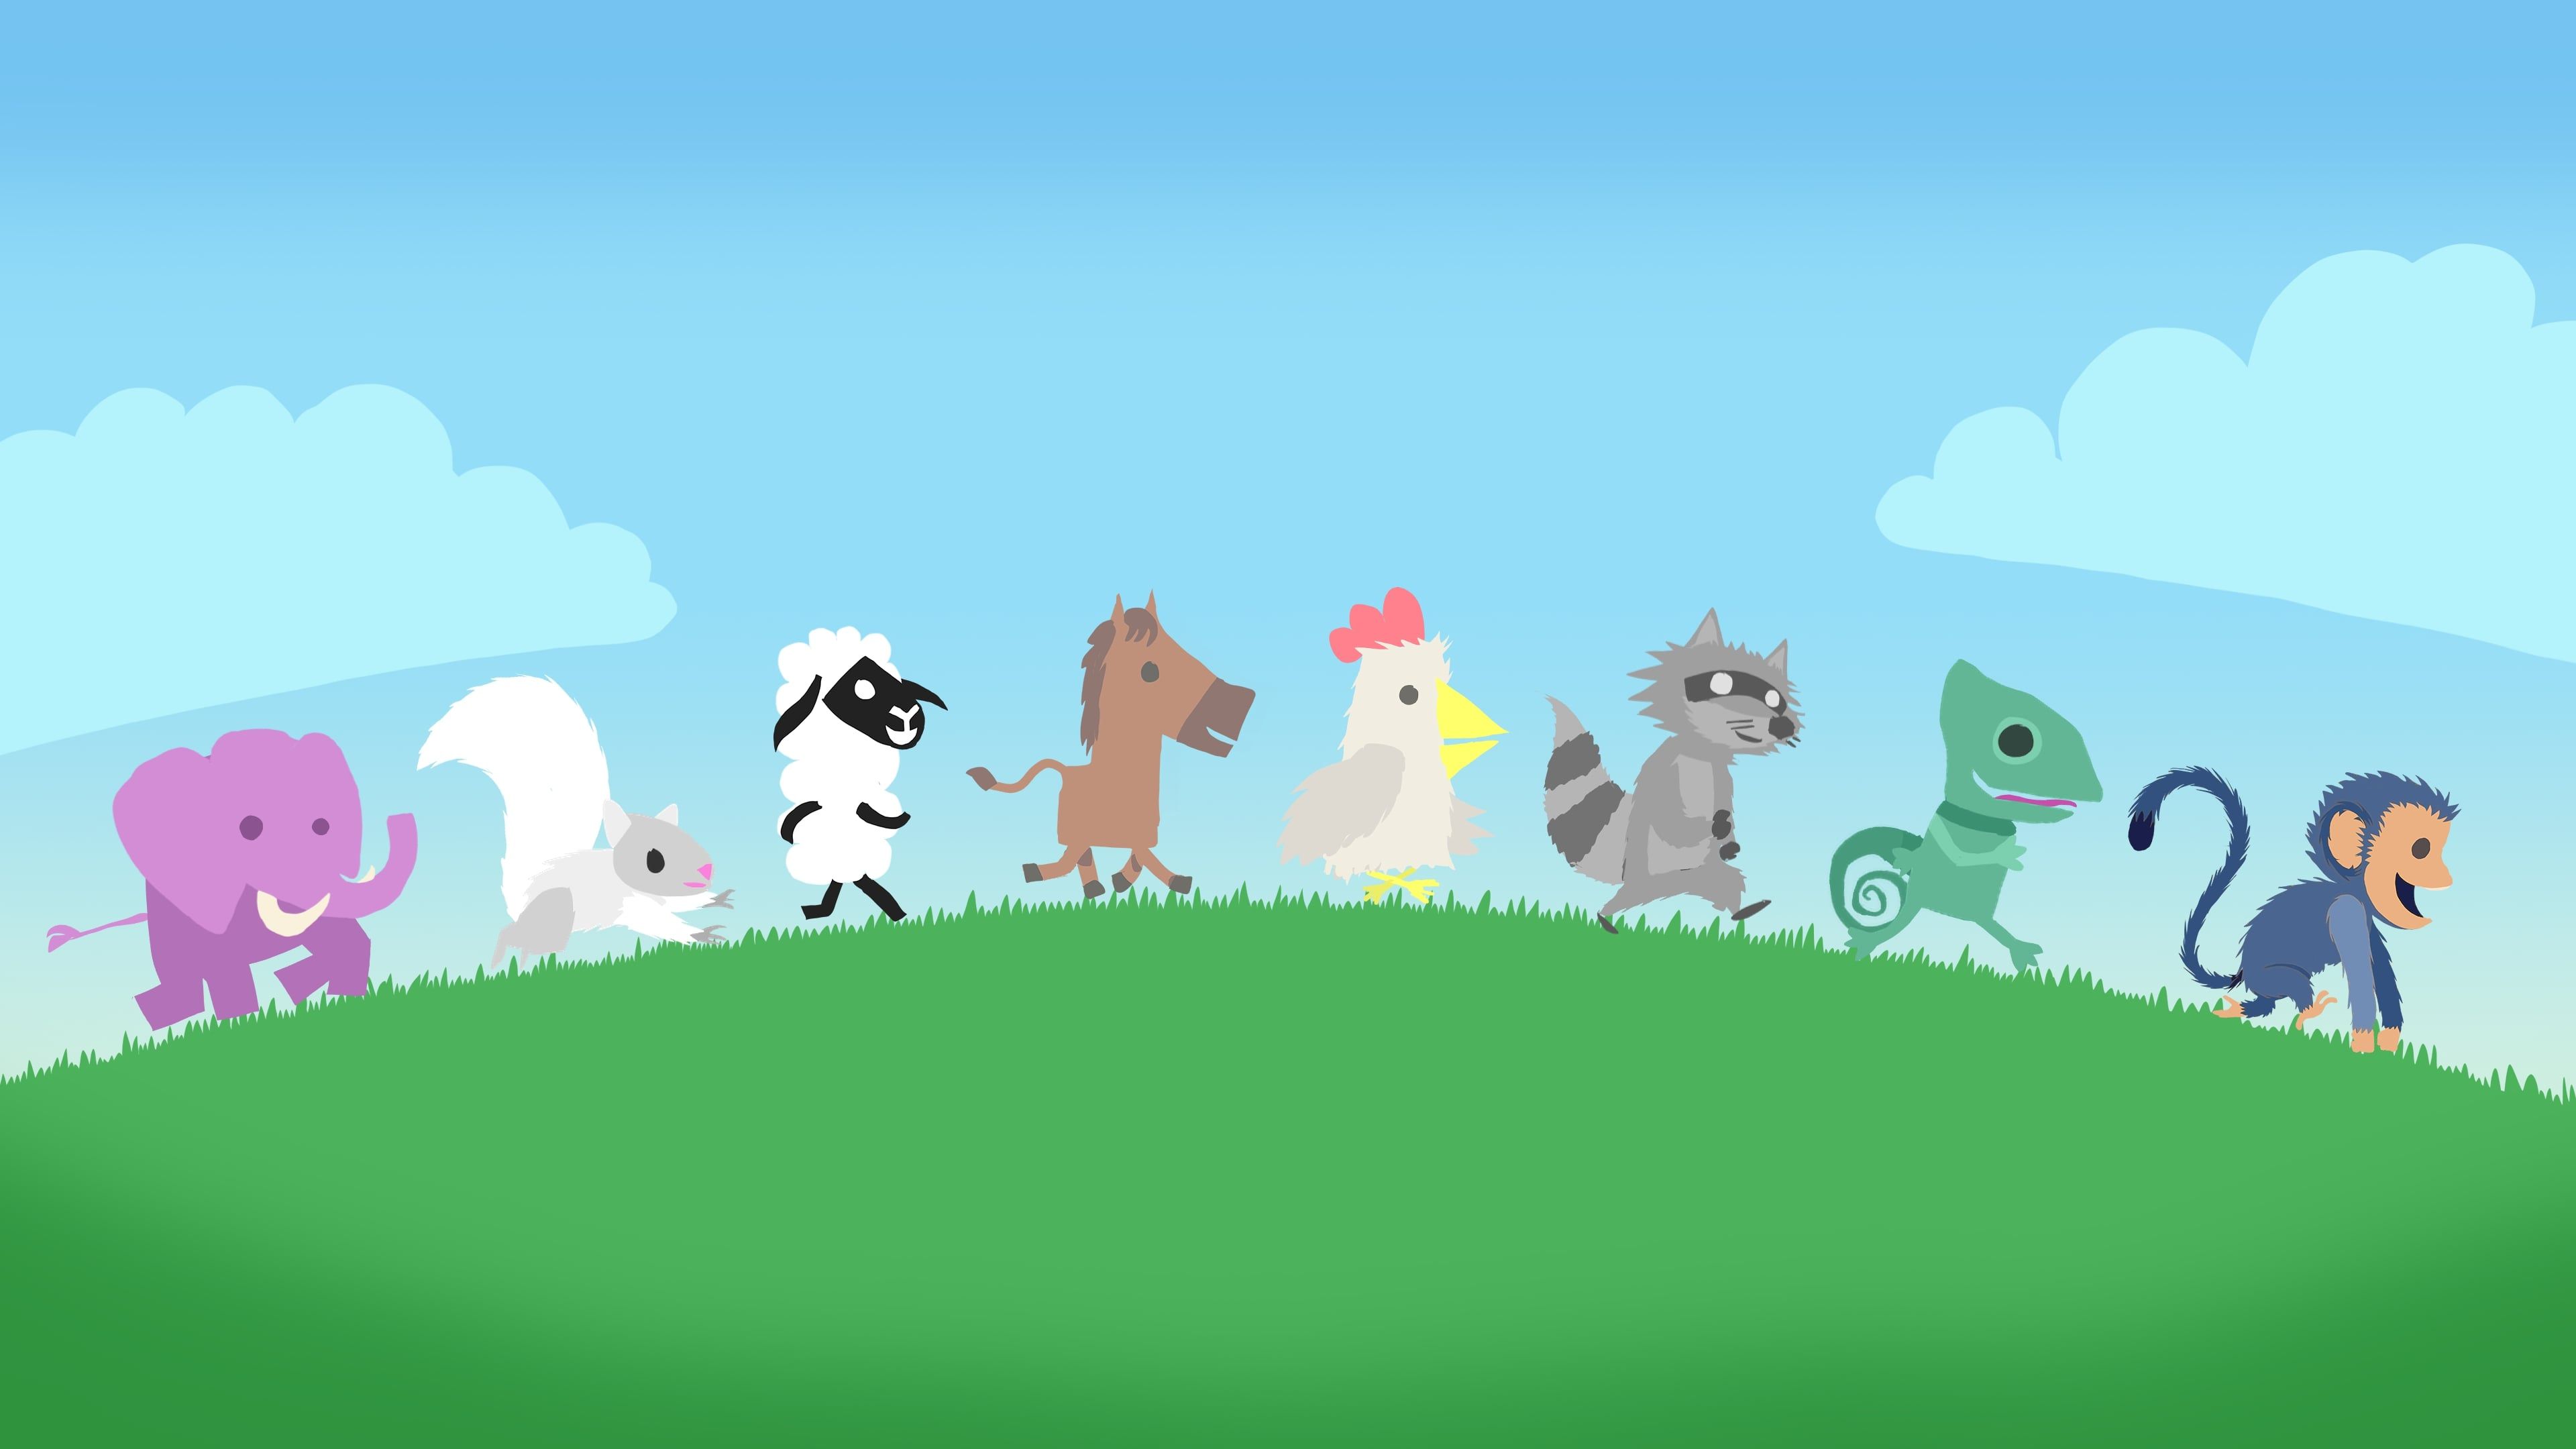 Ultimate Chicken Horse Trophies cover image